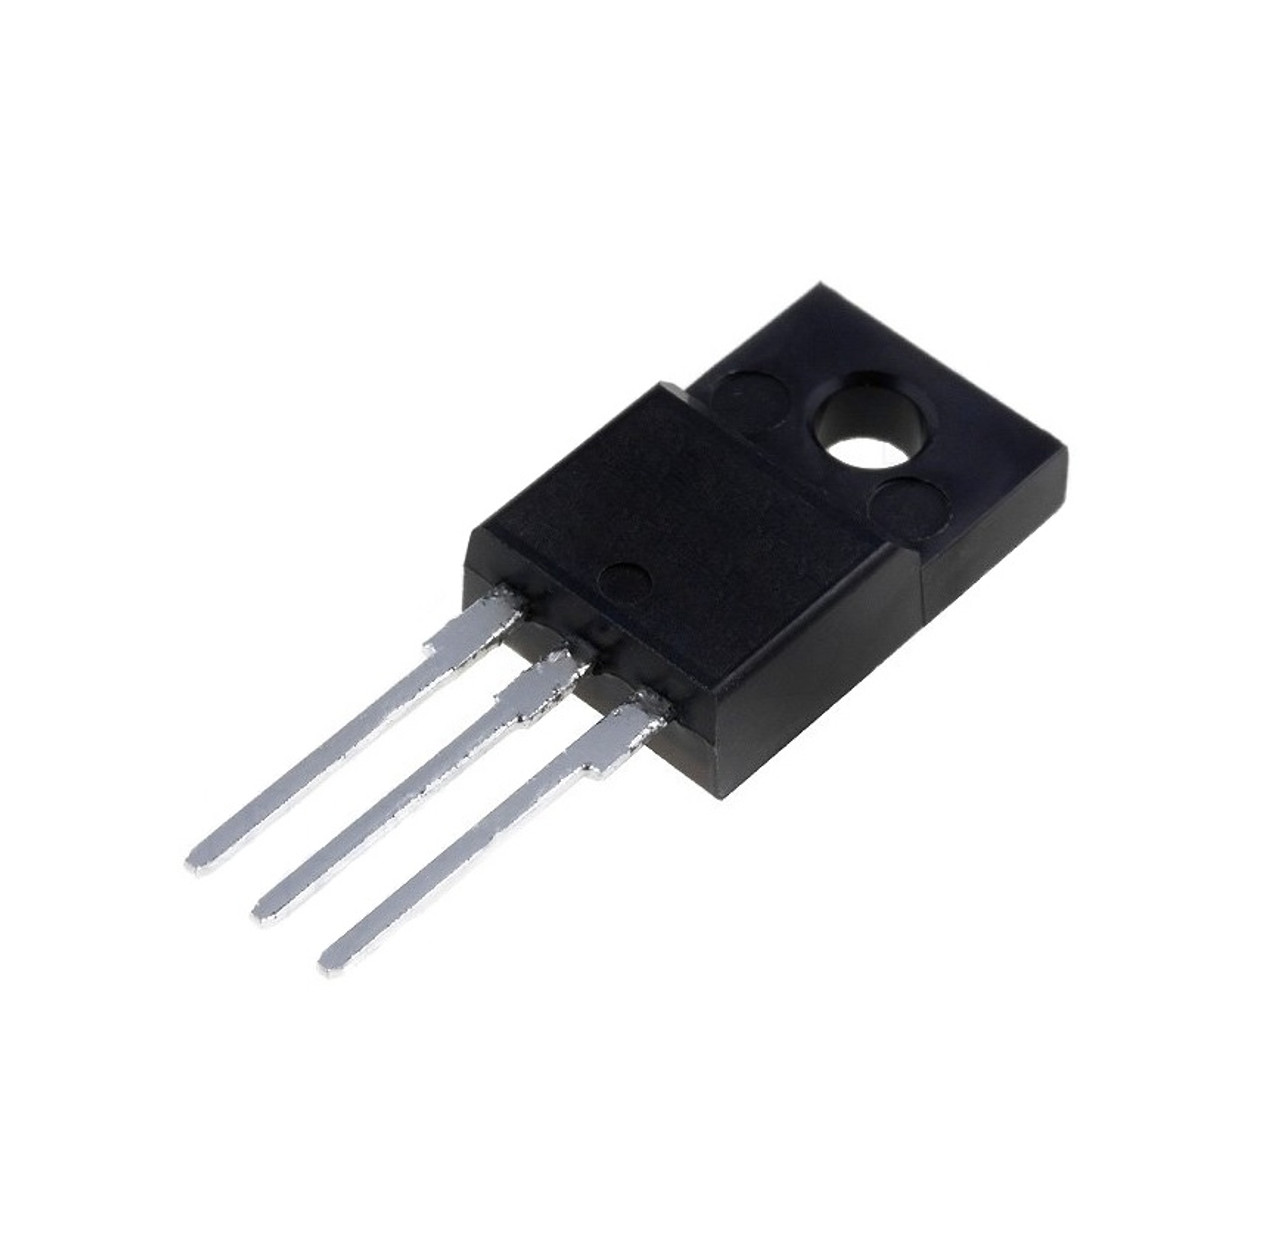 RJP63K2 ; Transistor IGBT 630V 55A 25W without Diode, TO-220F